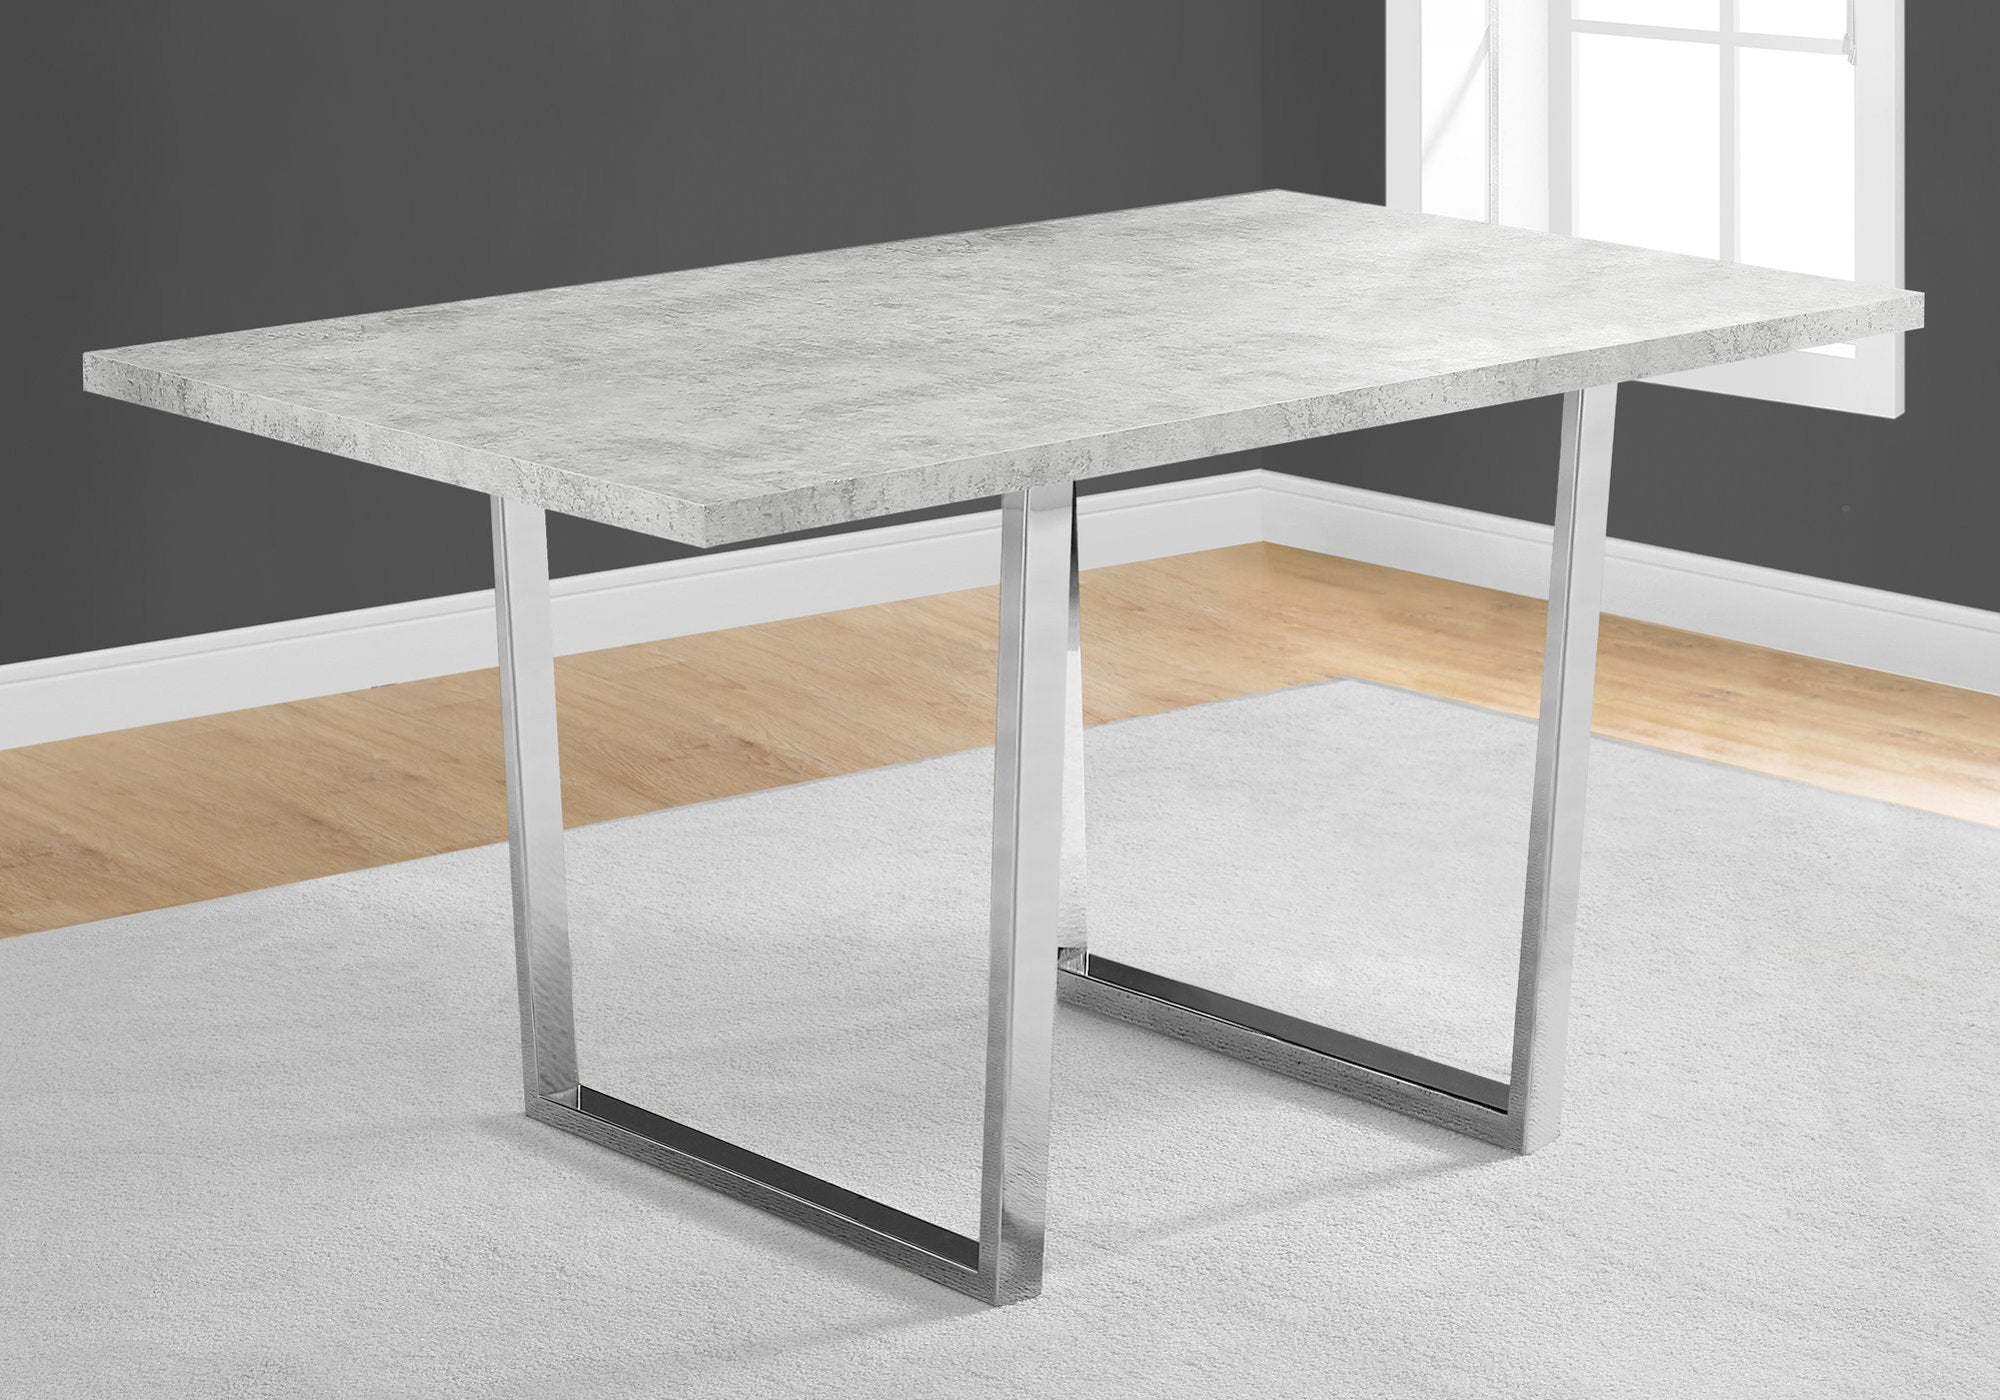 MN-591119    Dining Table, 60" Rectangular, Metal, Kitchen, Dining Room, Metal Legs, Laminate, Grey Cement Look, Chrome, Contemporary, Modern